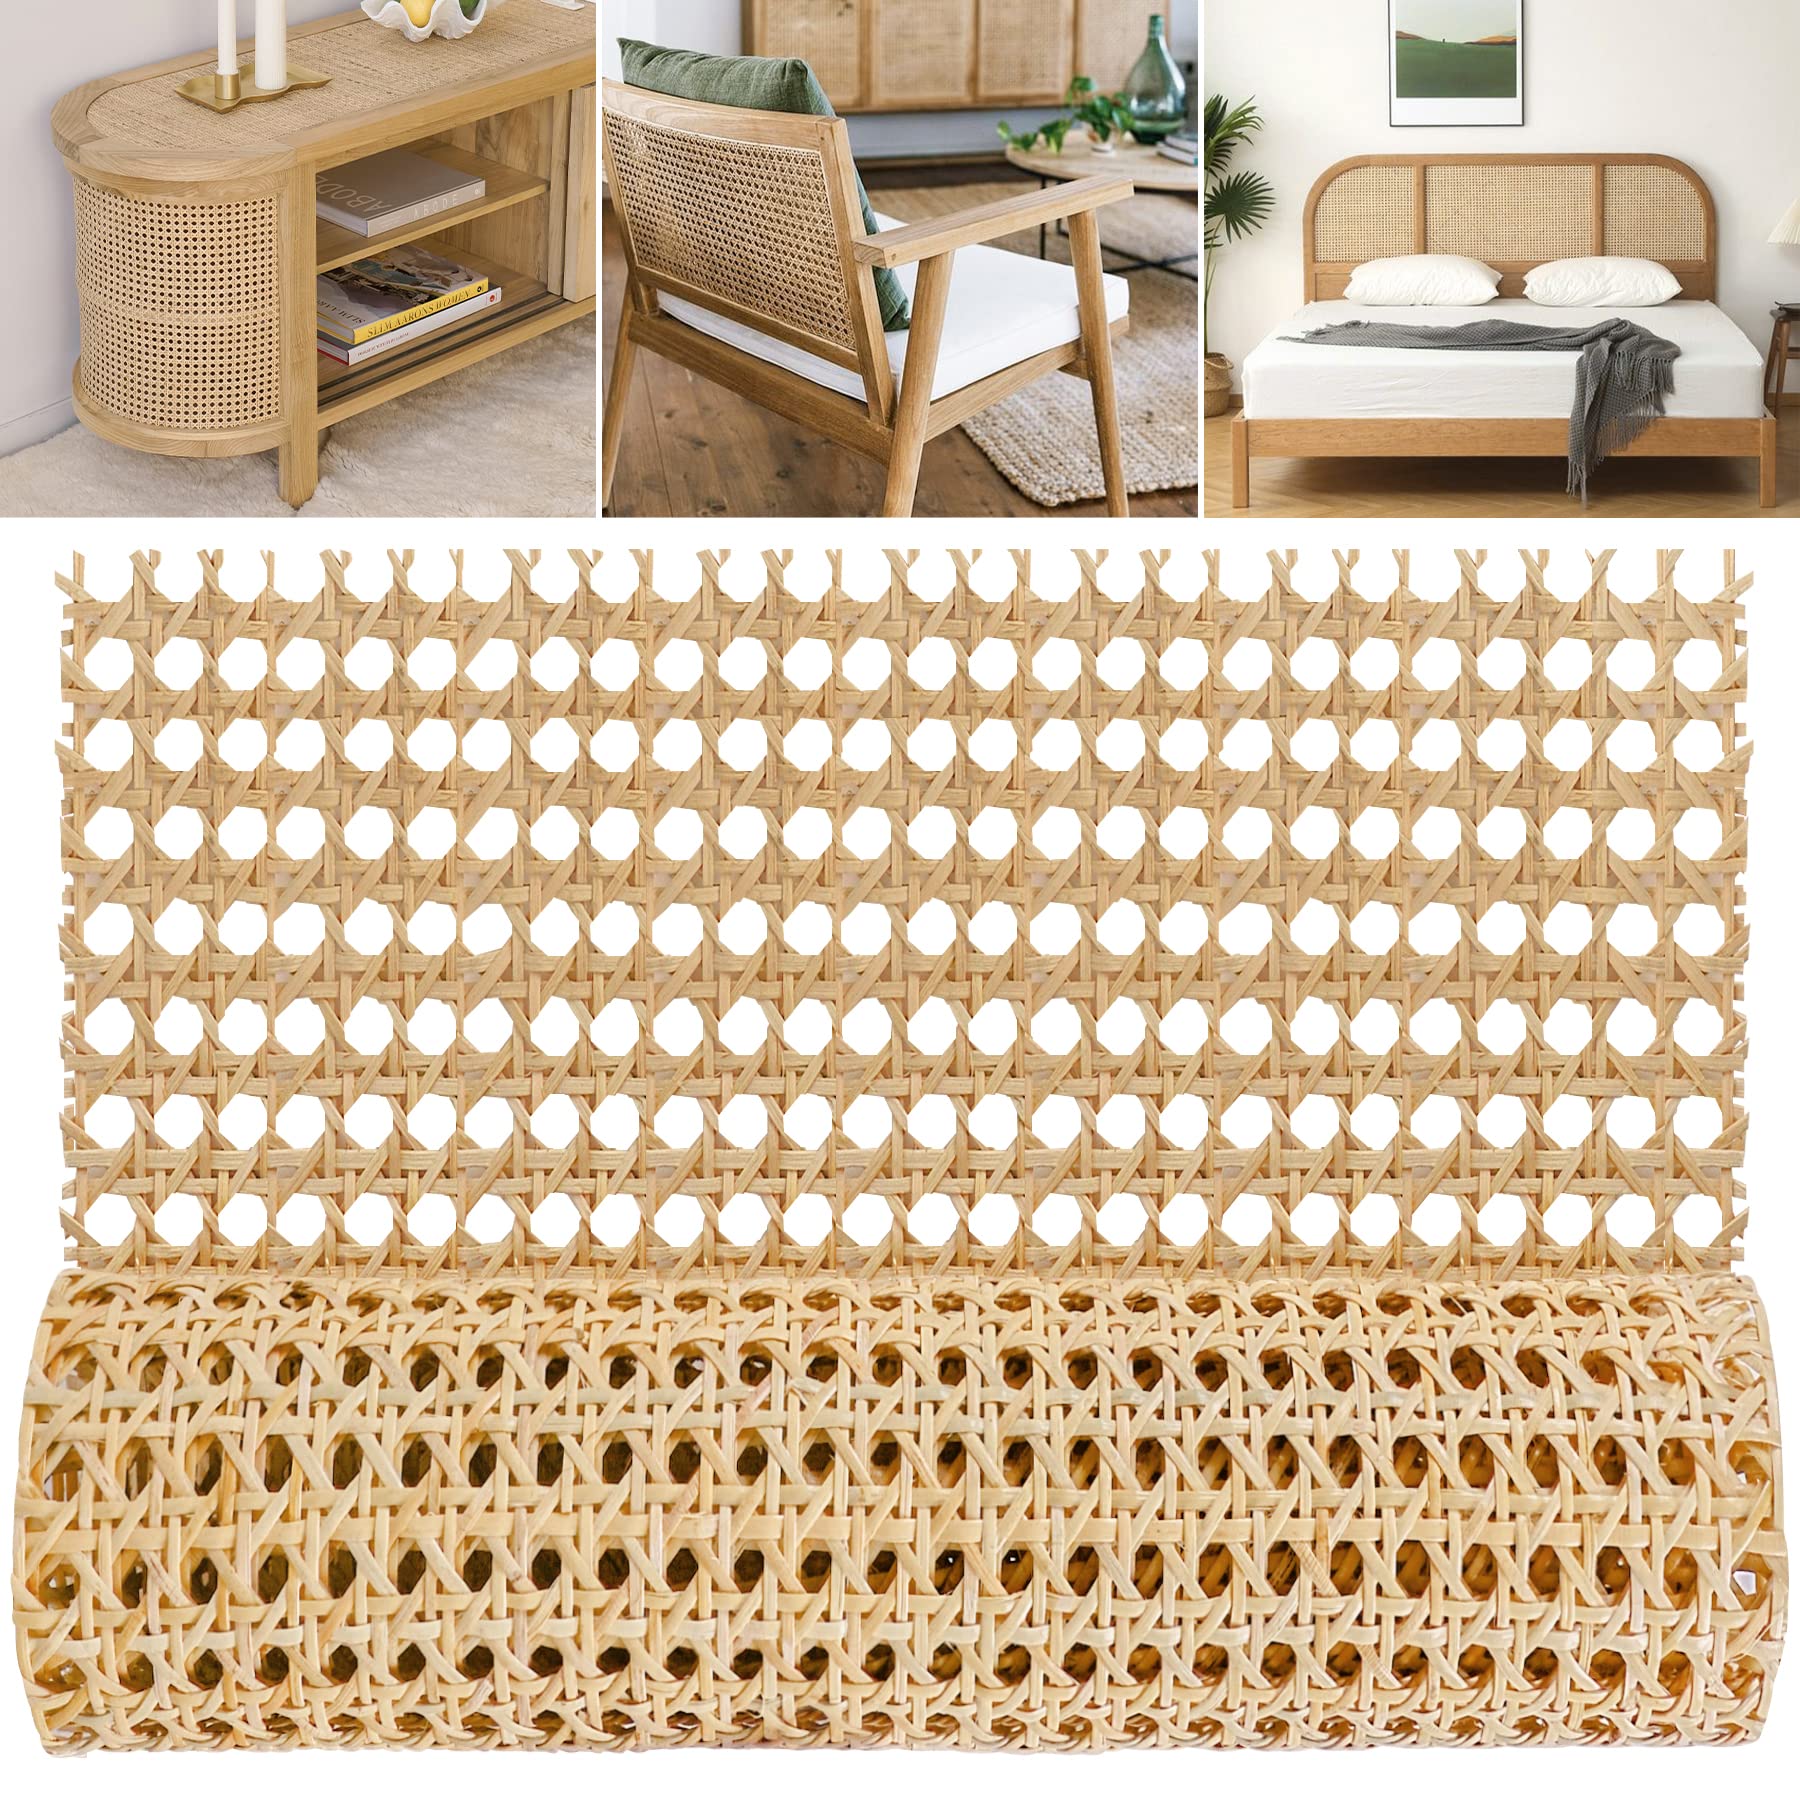 14 Width x 3.3 Feet Cane Rattan Webbing Roll for Caning Projects, Cane  Webbing Sheet, Natural Pre-Woven Open Mesh Cane for Furniture Chair Cabinet